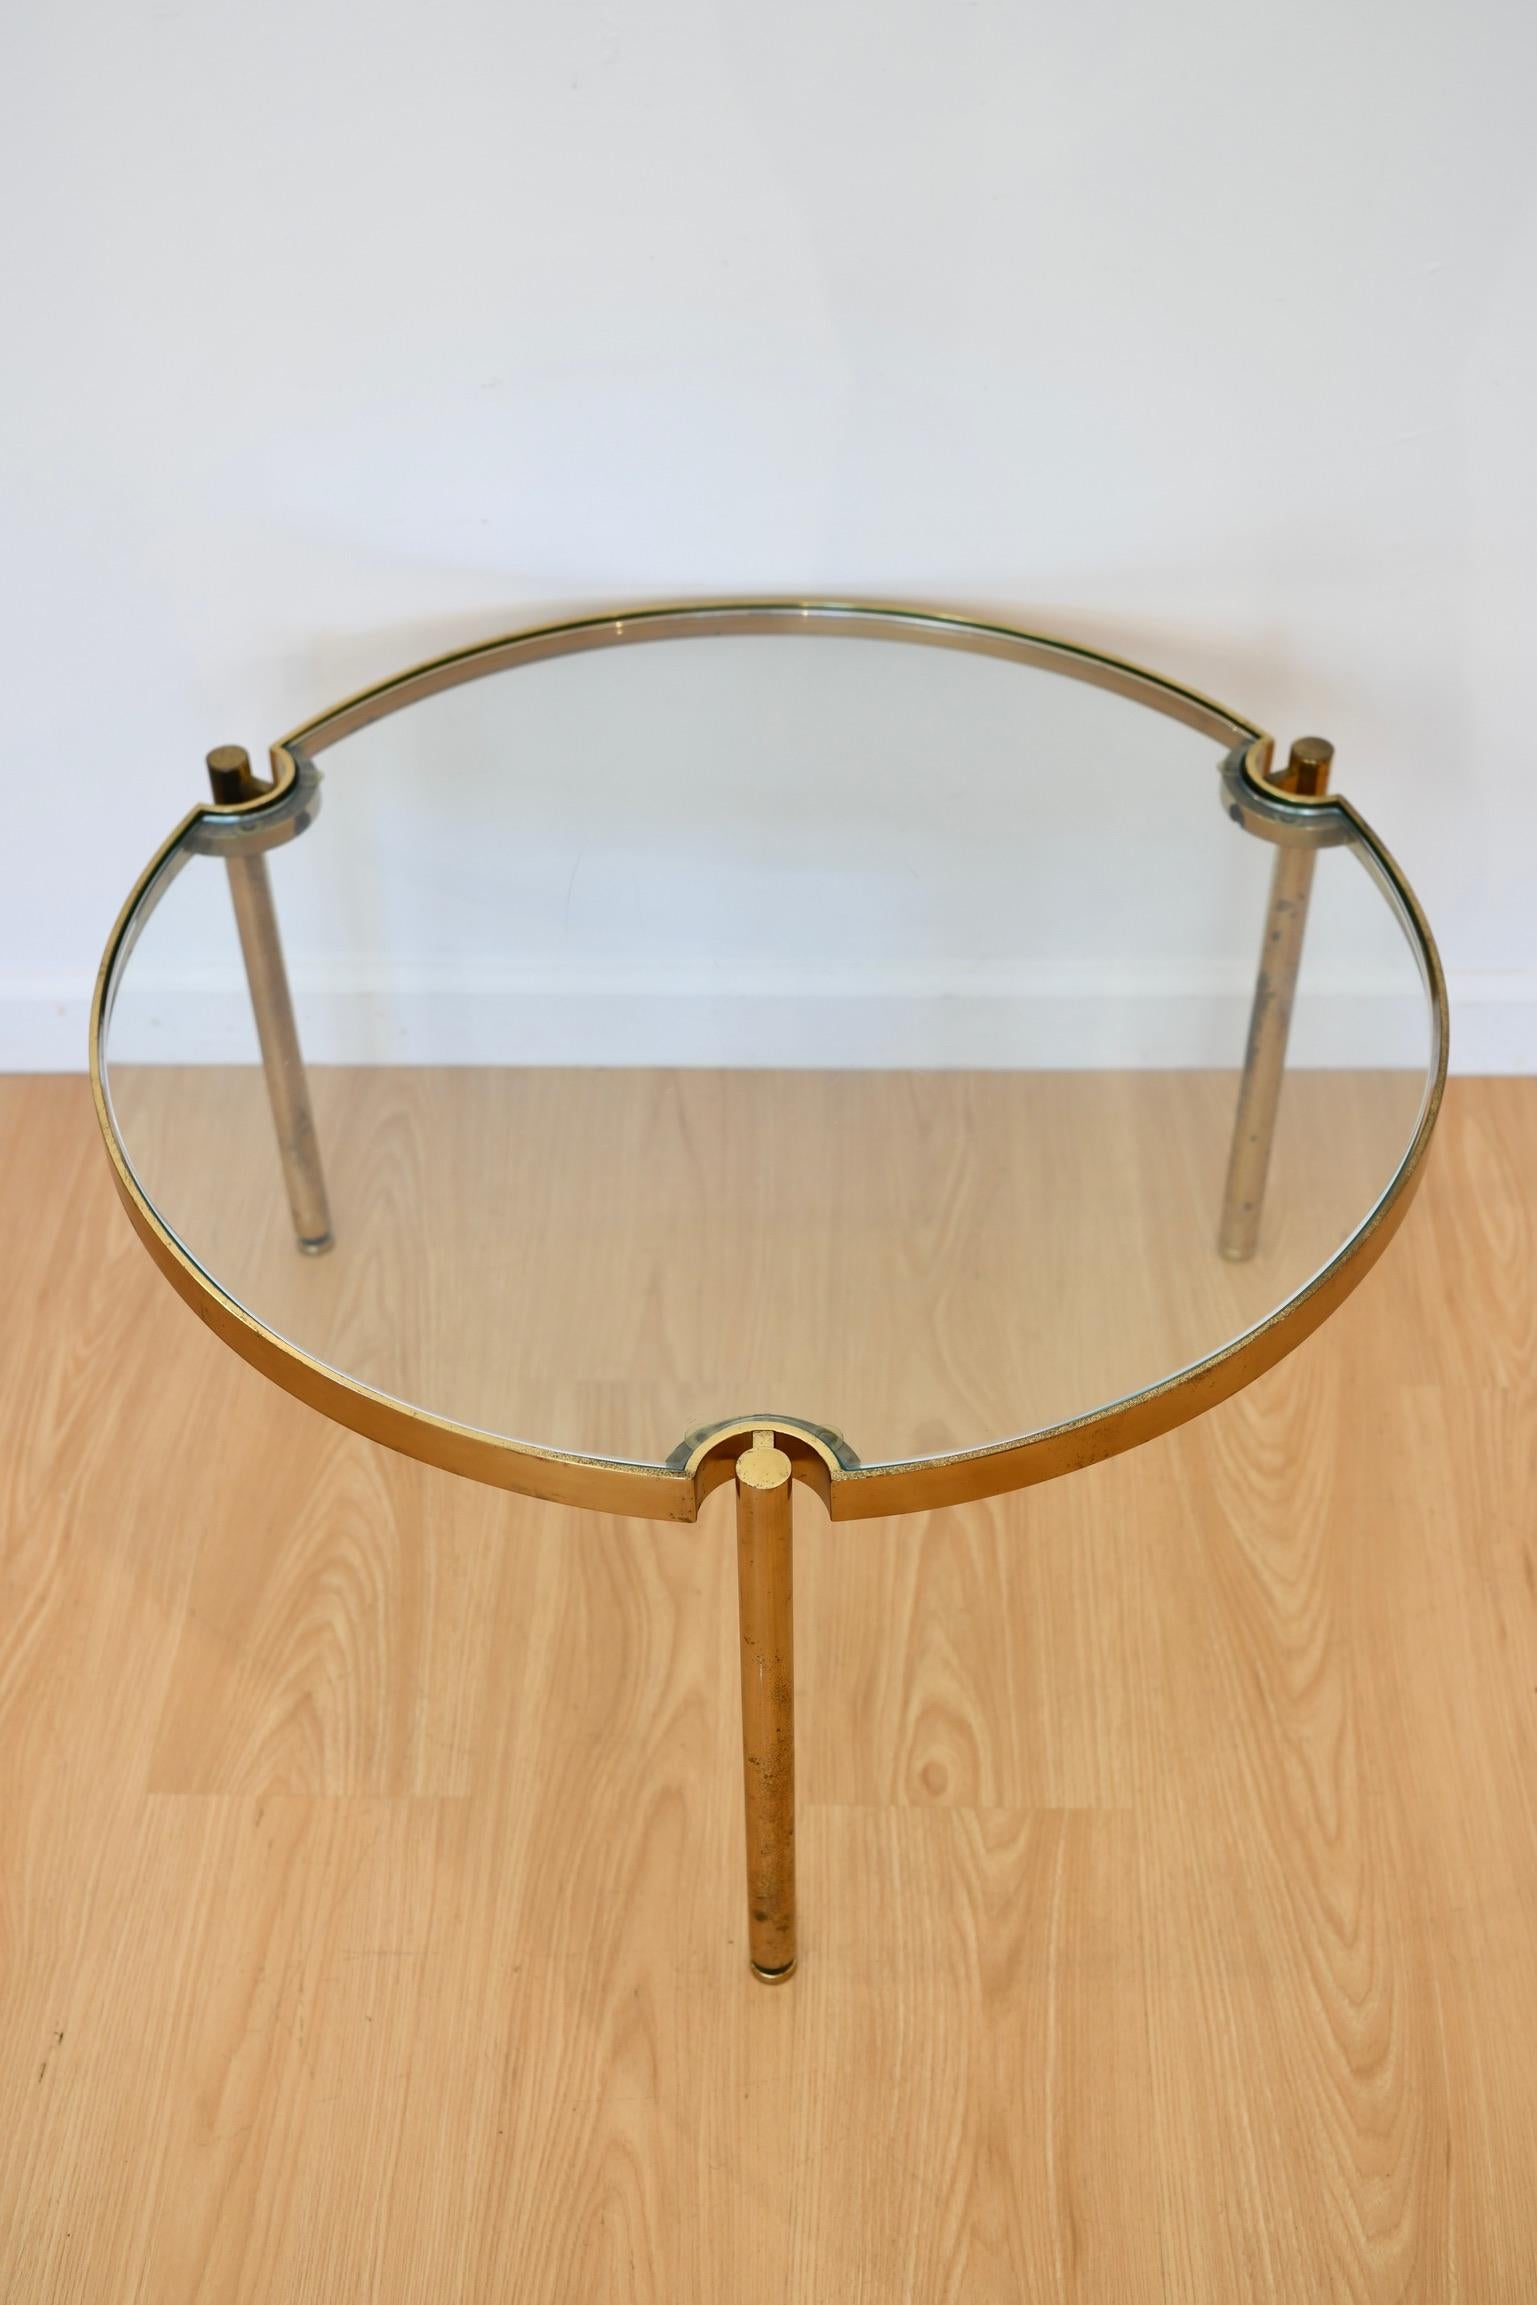 Tri-leg midcentury round brass coffee table with glass top. Some scratching to glass. Dimensions: 19